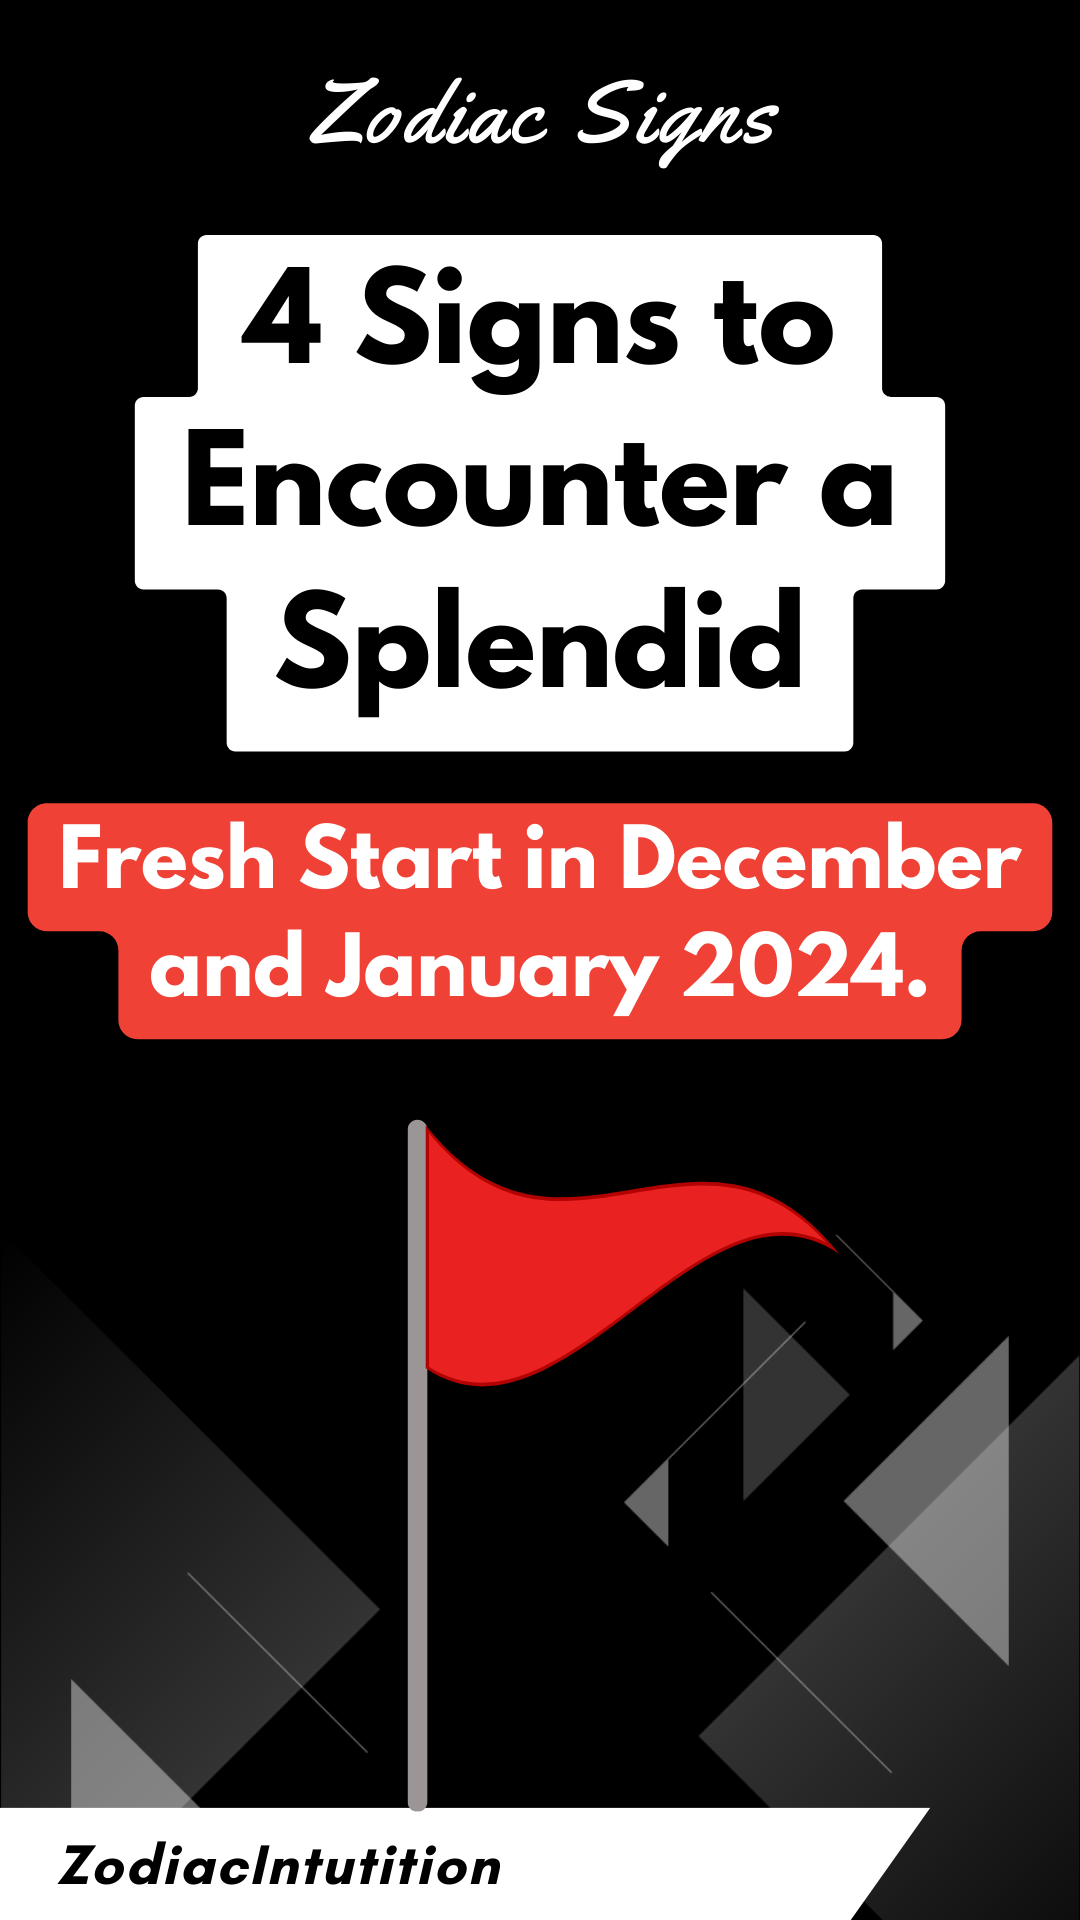 4 Signs to Encounter a Splendid Fresh Start in December and January 2024.